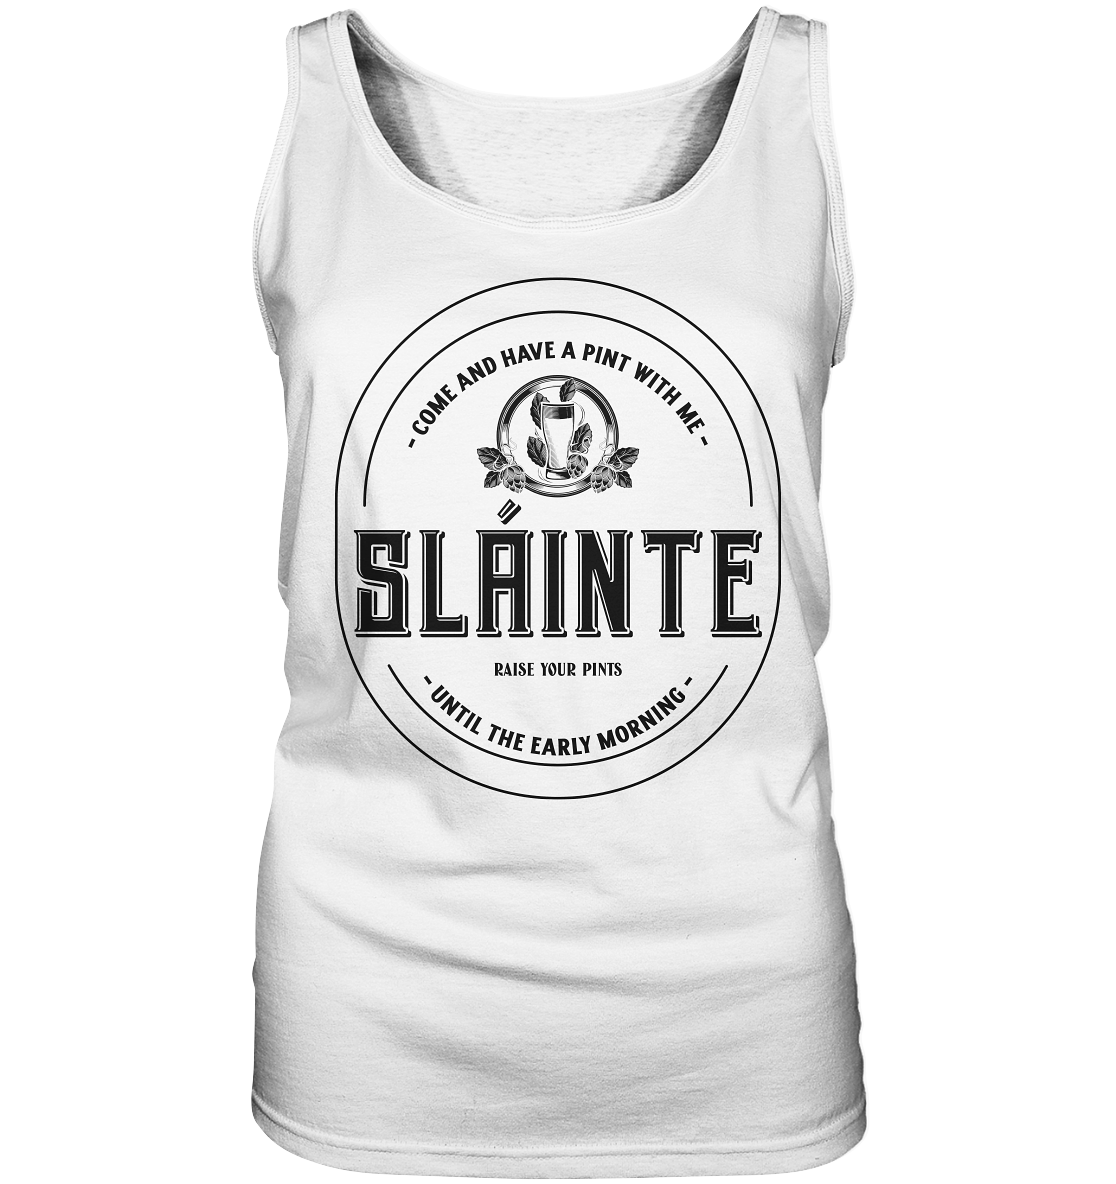 Sláinte "Come And Have A Pint With Me" - Ladies Tank-Top